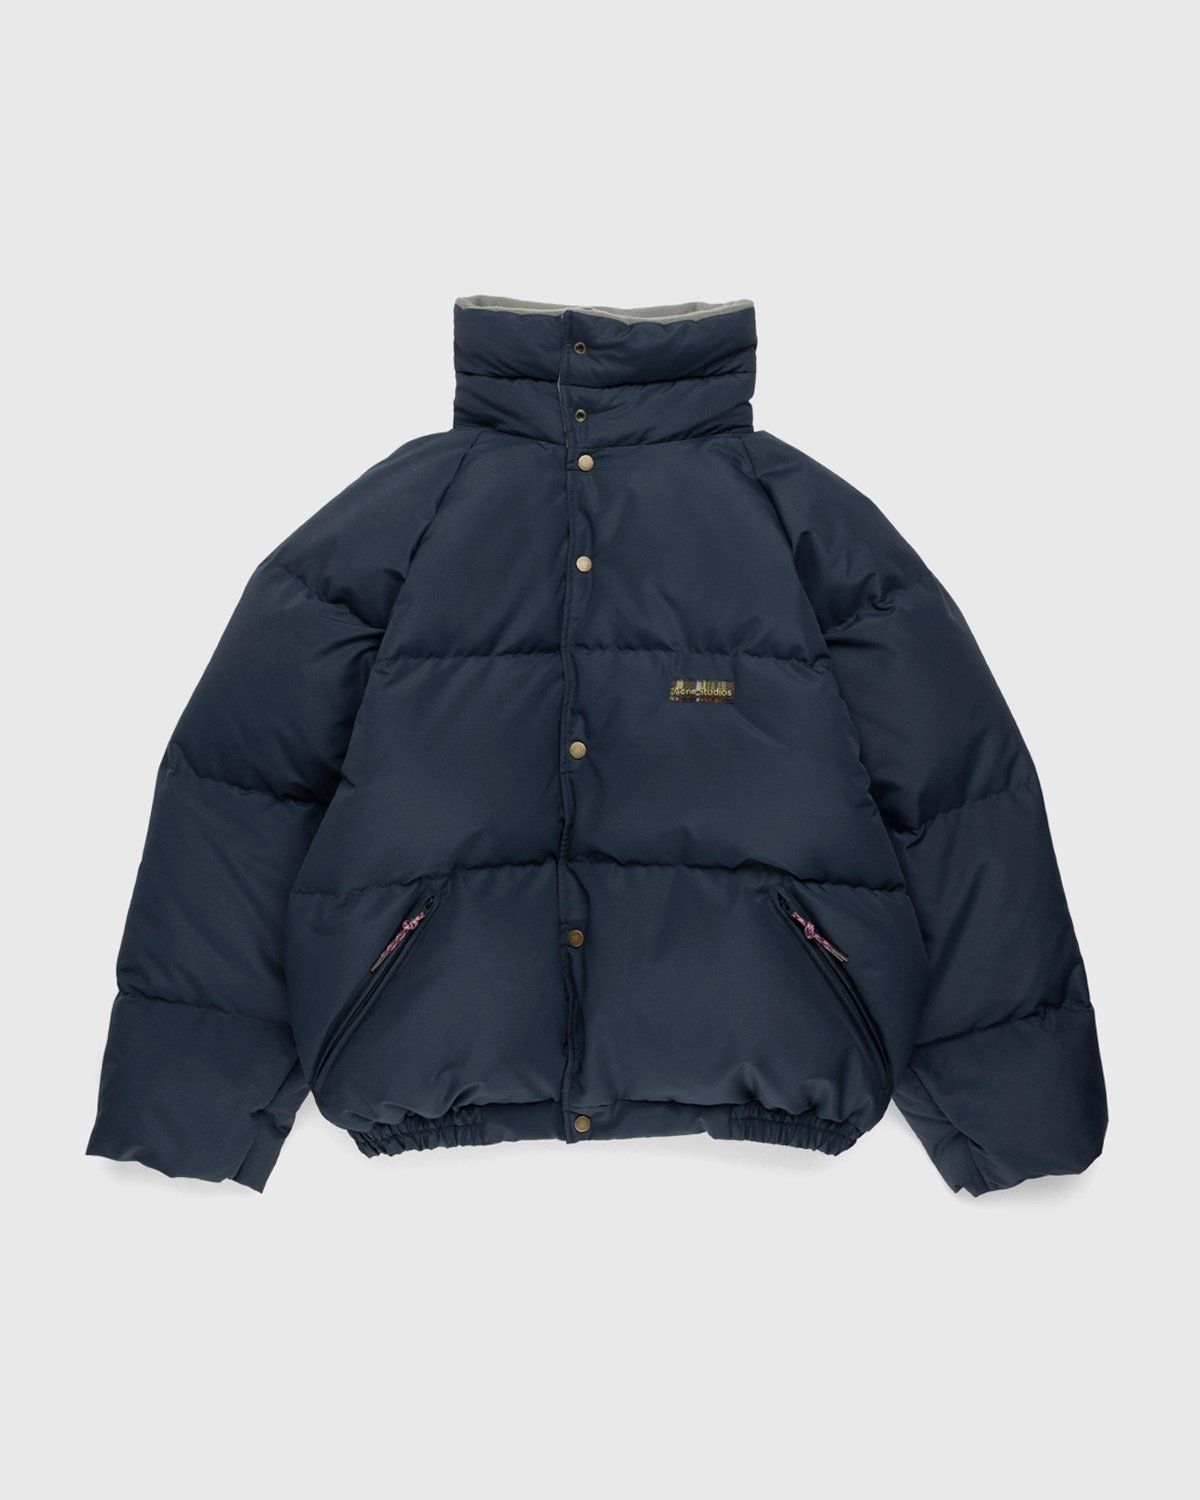 Acne Studios – Down Puffer Jacket Charcoal Grey - Image 1